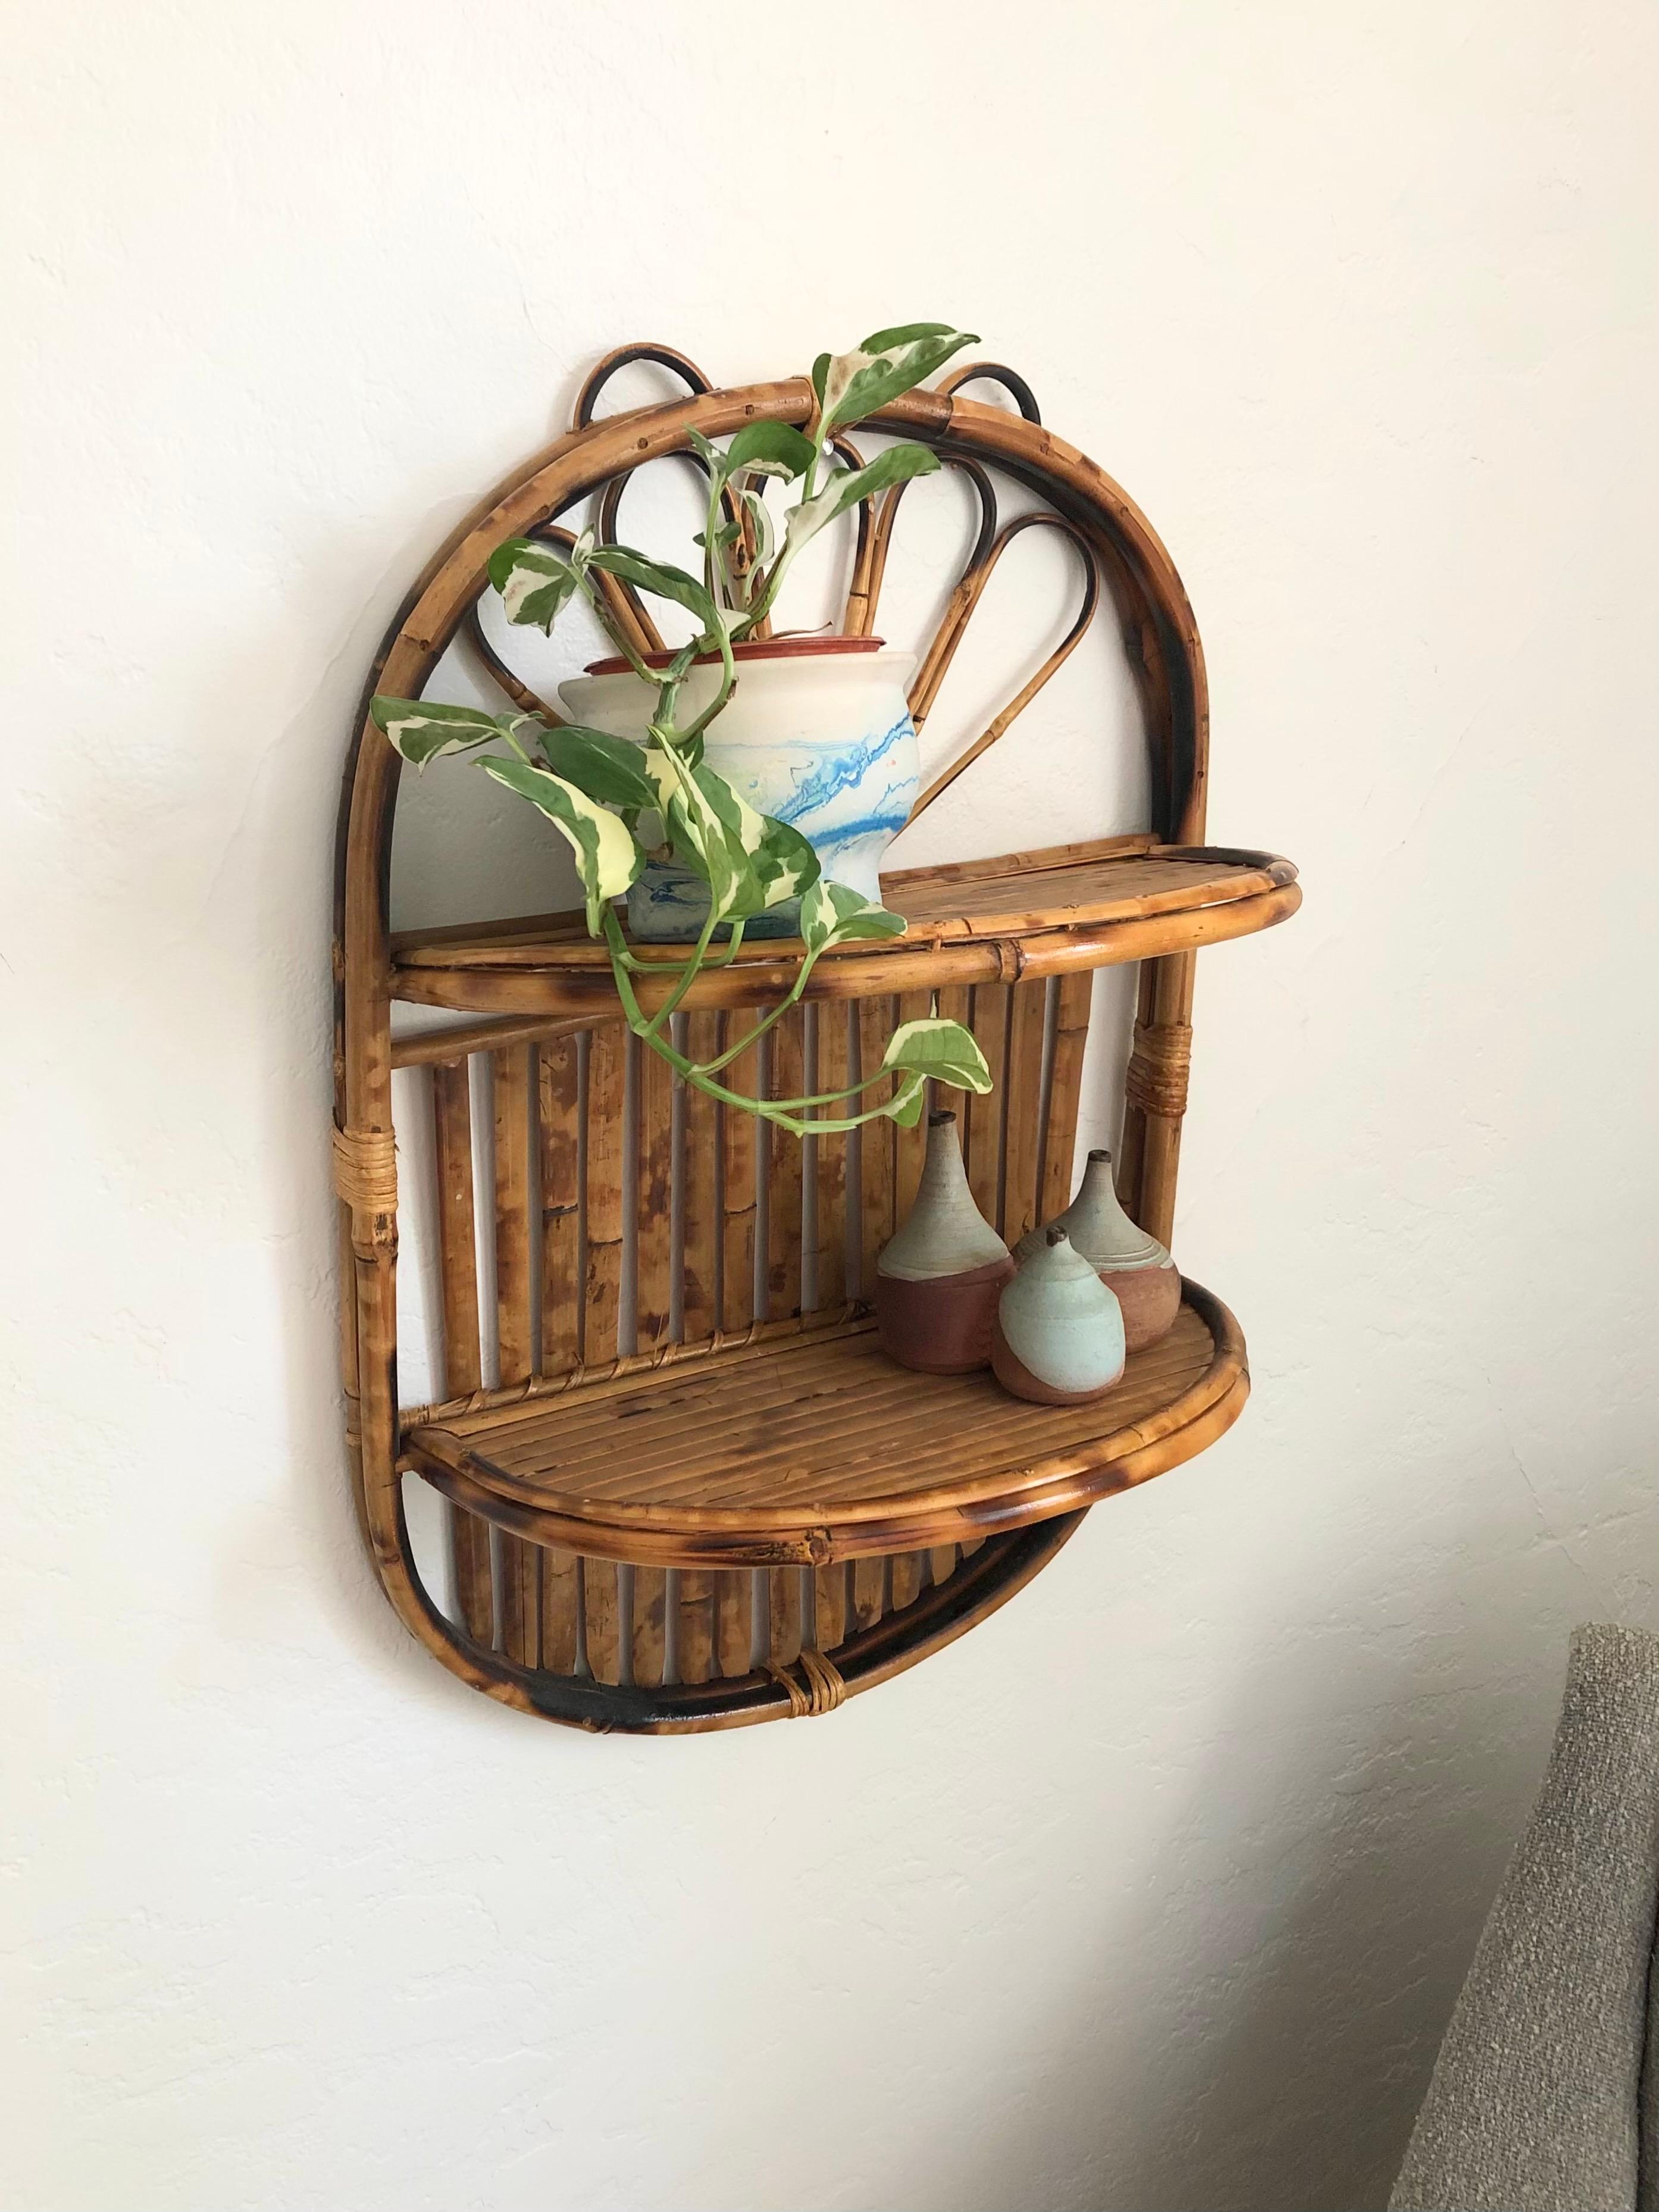 A vintage oval bamboo shelf. Features 2 semi circular bamboo shelves that can fold away to make the shelf flat for storage. Perfect for displaying small plants or decorative items.